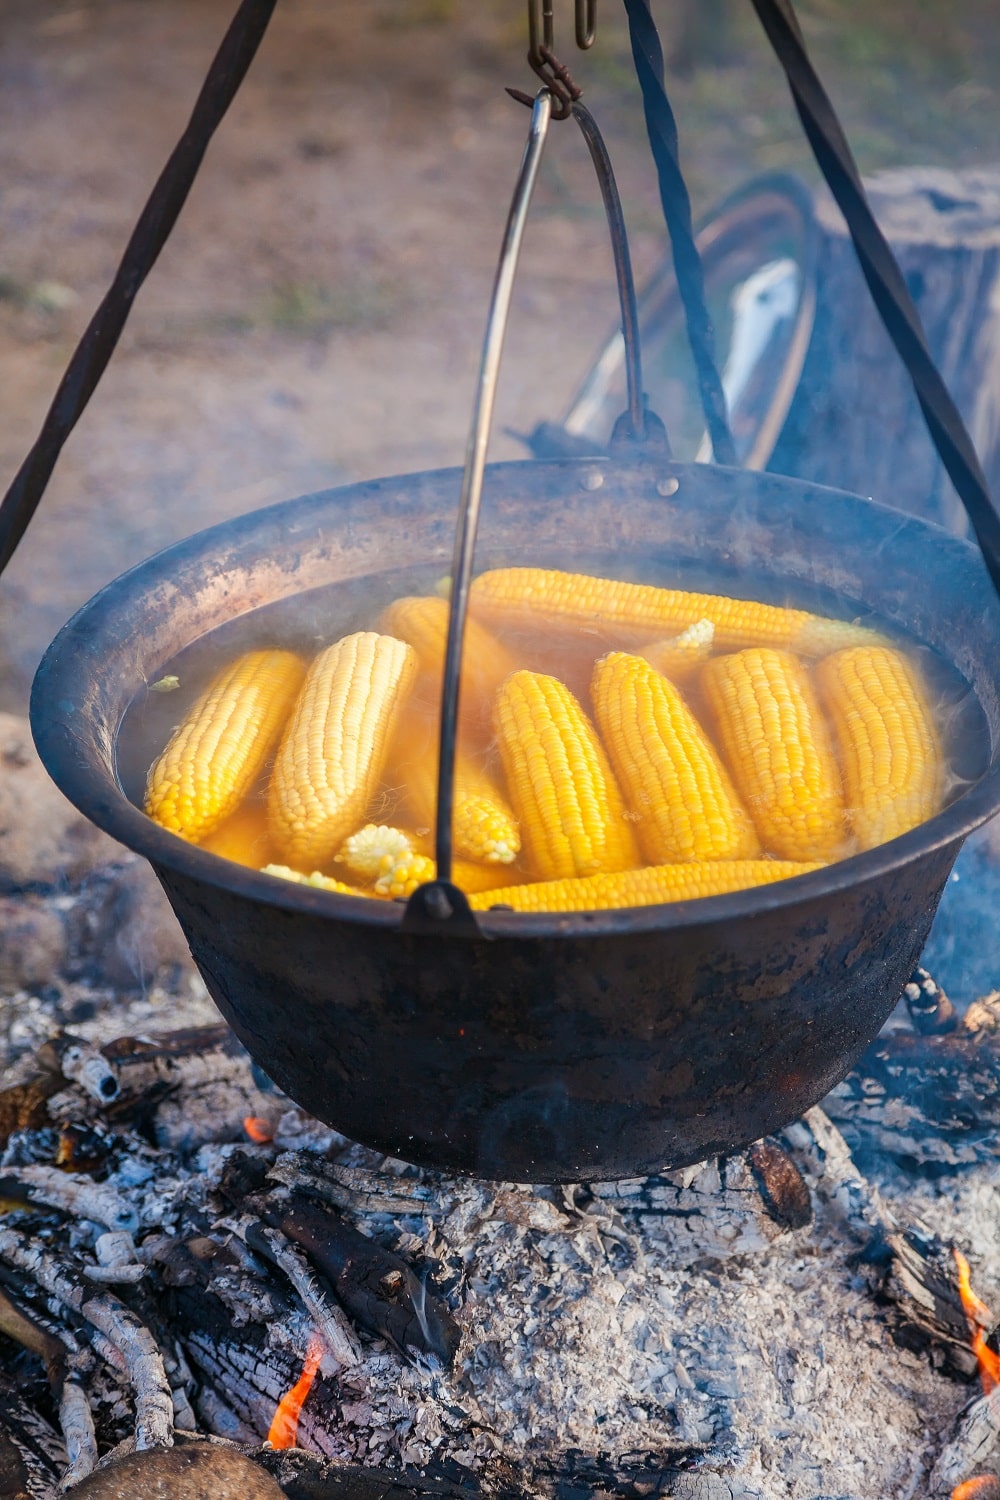 Corncobs in a boiling water over campfire